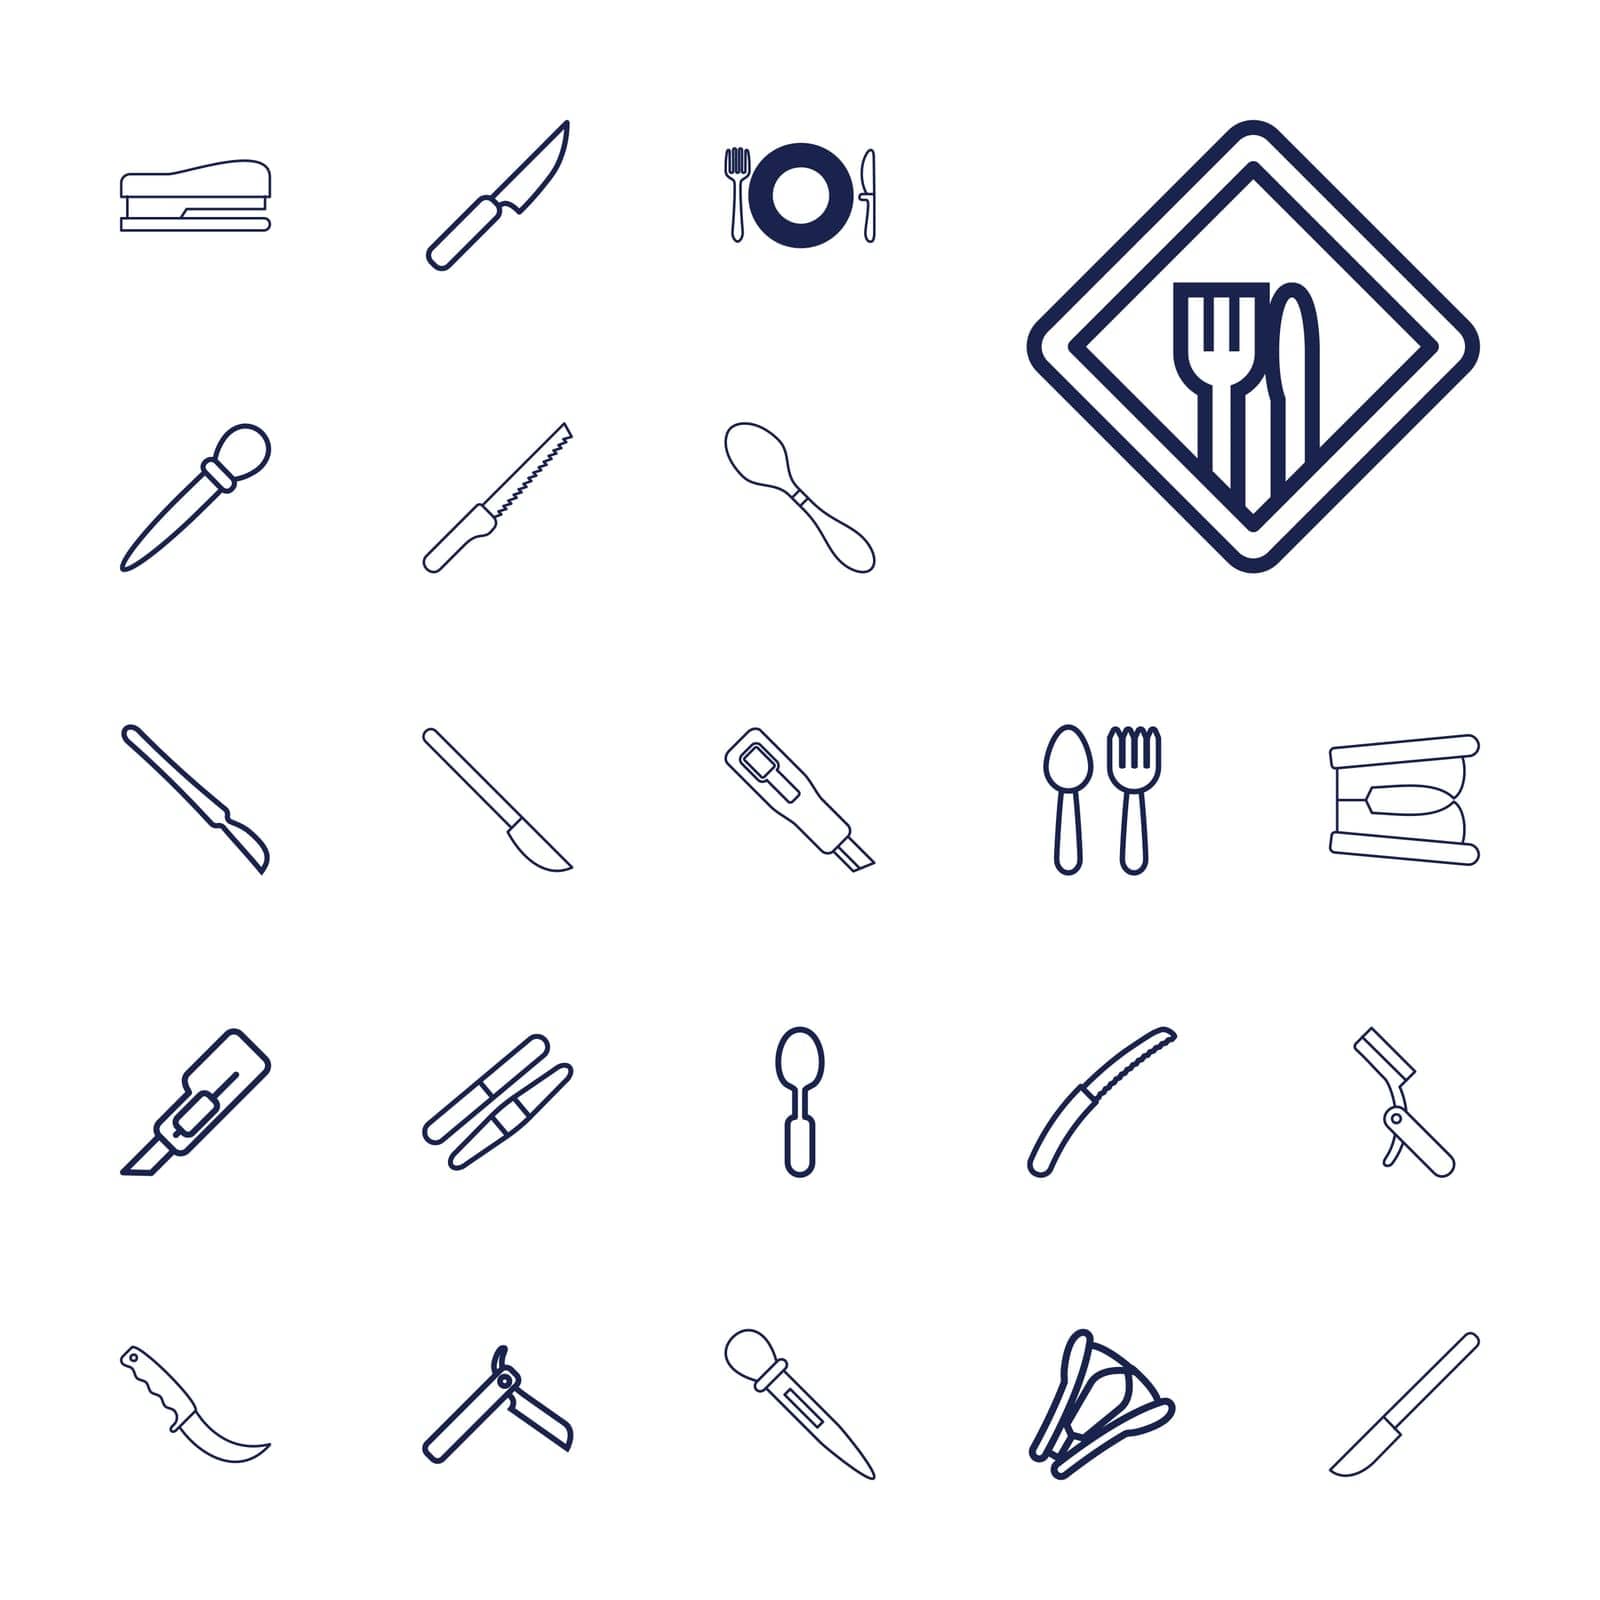 symbol,cut,gardening,icon,sign,isolated,cutter,plate,blade,sawing,white,and,design,spoon,scalpel,vector,cooking,kitchen,bllade,art,set,stapler,nail,restaurant,black,metal,health,equipment,tool,sharp,knife,fork,background,silhouette,razor,illustration,object,care